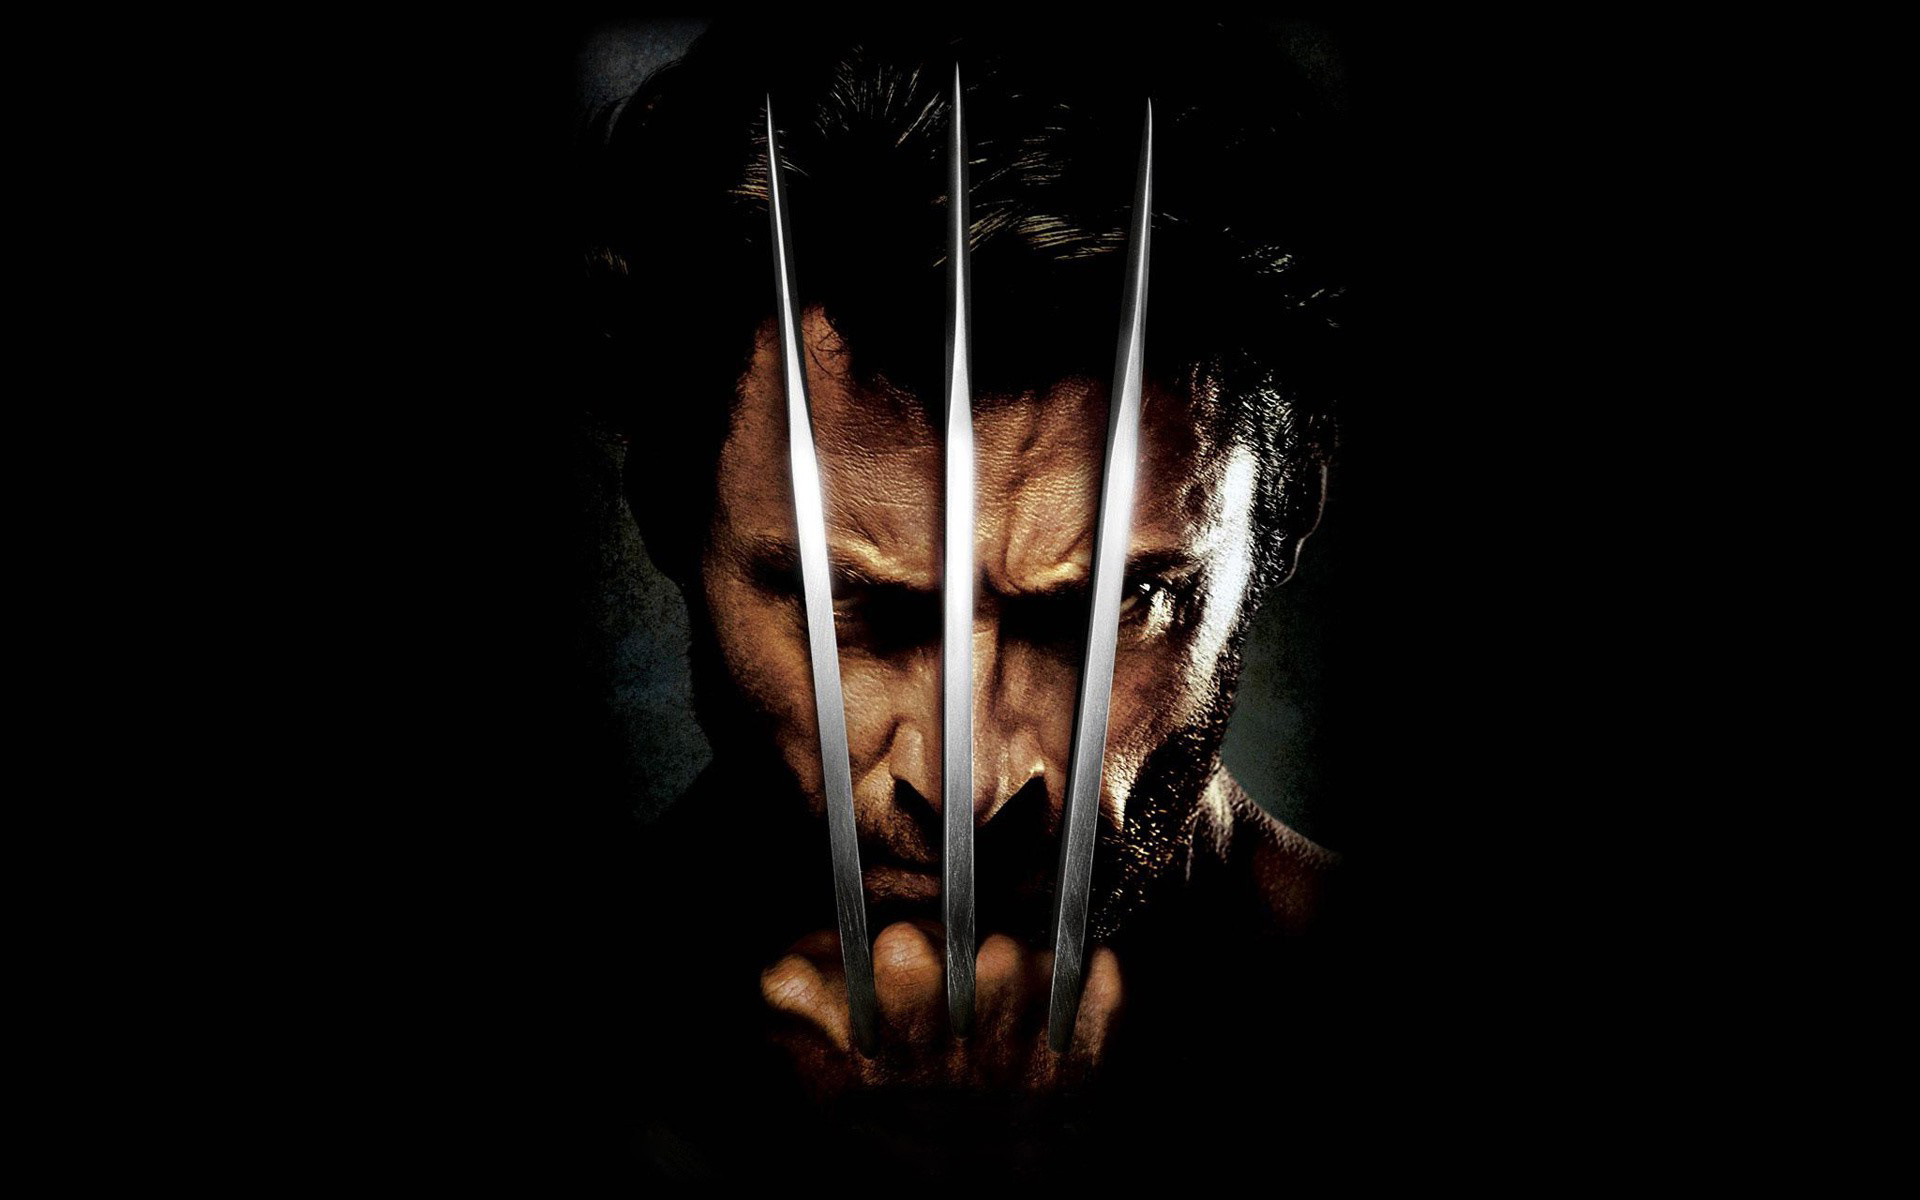 wolverine wallpaper,wolverine,darkness,fiction,fictional character,movie